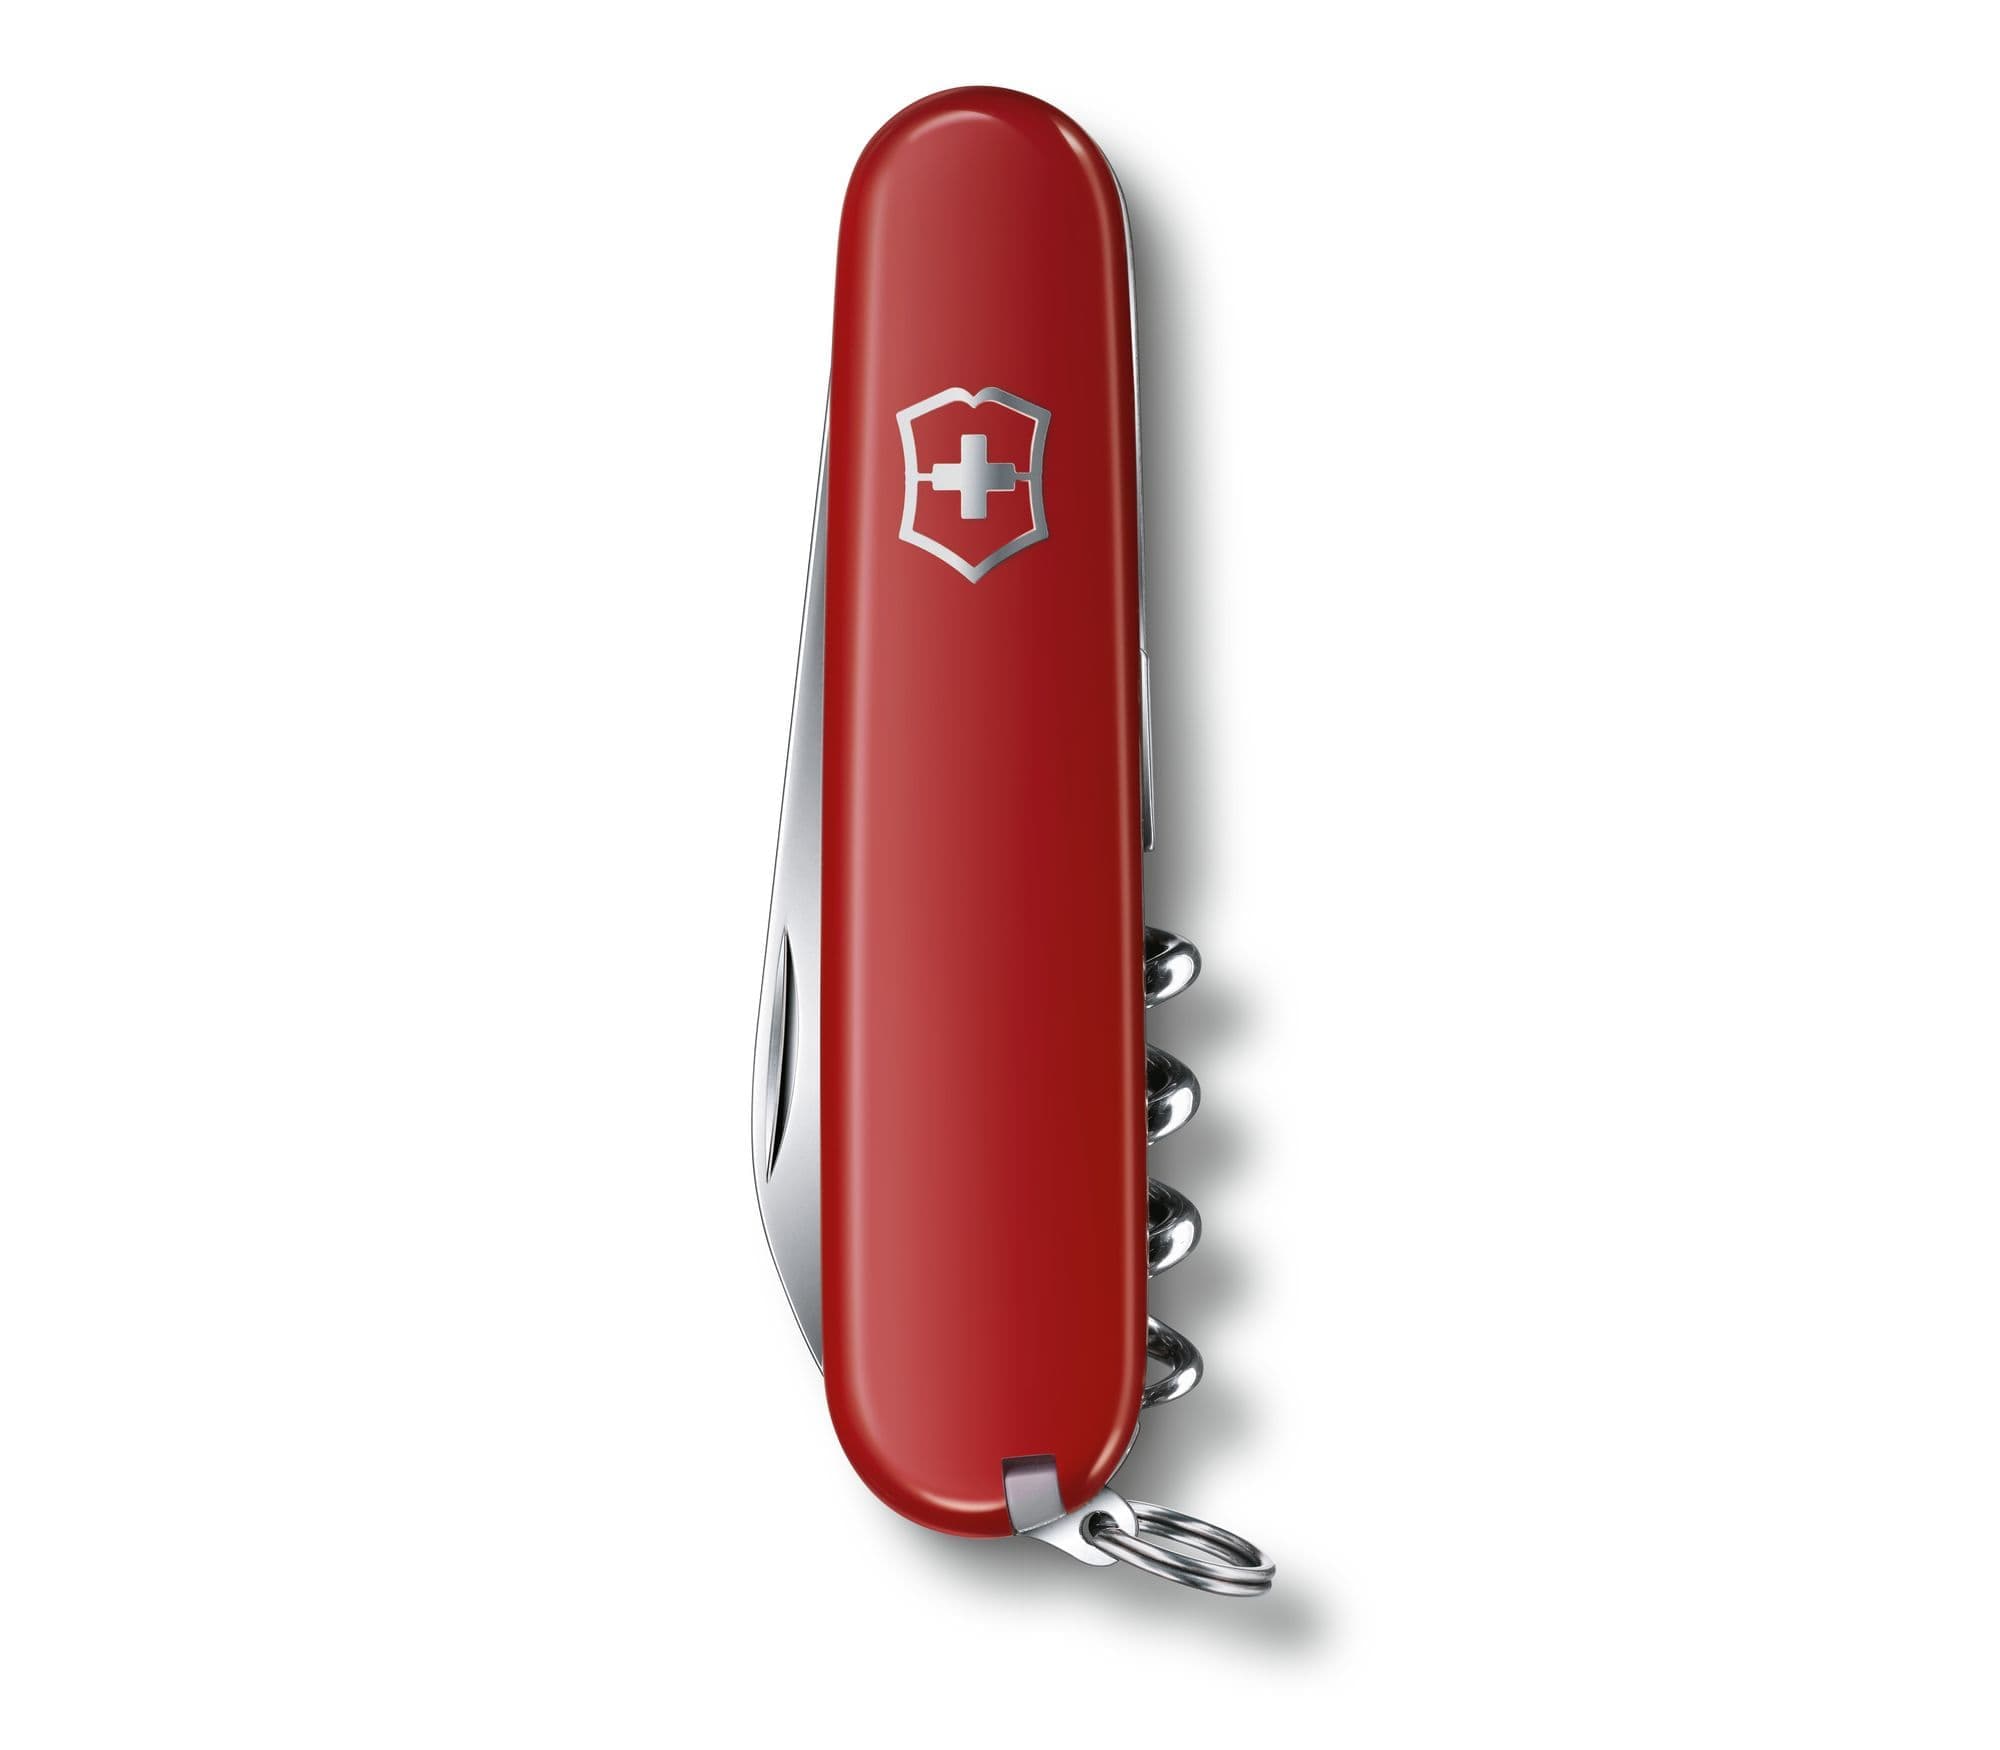 Victorinox Swiss Army Knife Waiter 84mm Red With 9 Functions - 0.3303